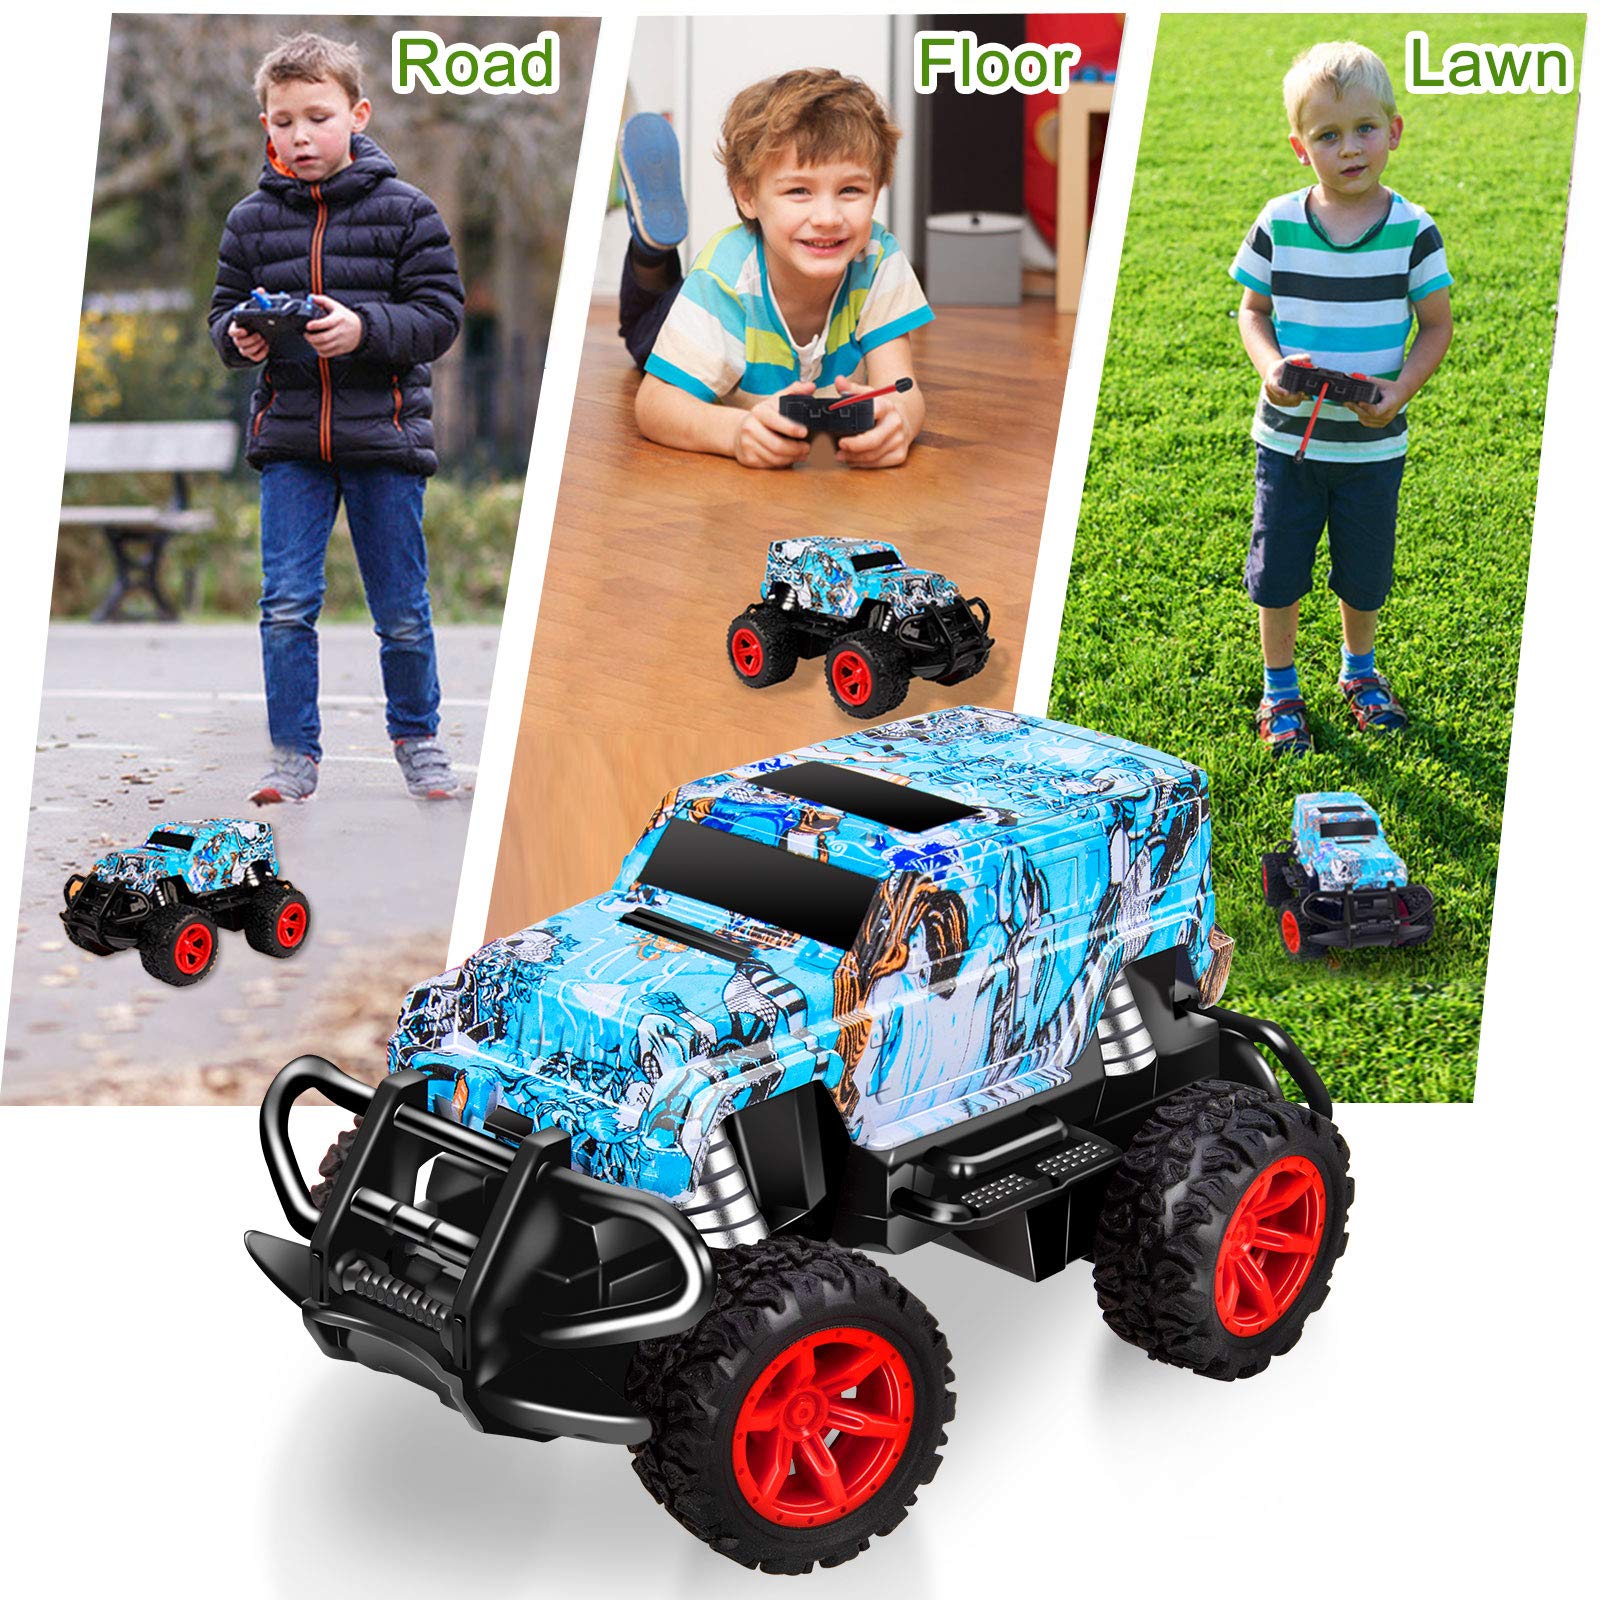 NARRIO Kids Toys for 3 4 5 6 Year Old Boys Birthday Gift, Remote Control Car for Boys 3-5 RC Cars Monster Trucks for Boy Toys Age 4-7, Christmas Teen Gifts for 3-7 Year Old Boys Toddler Toys Age 2-6